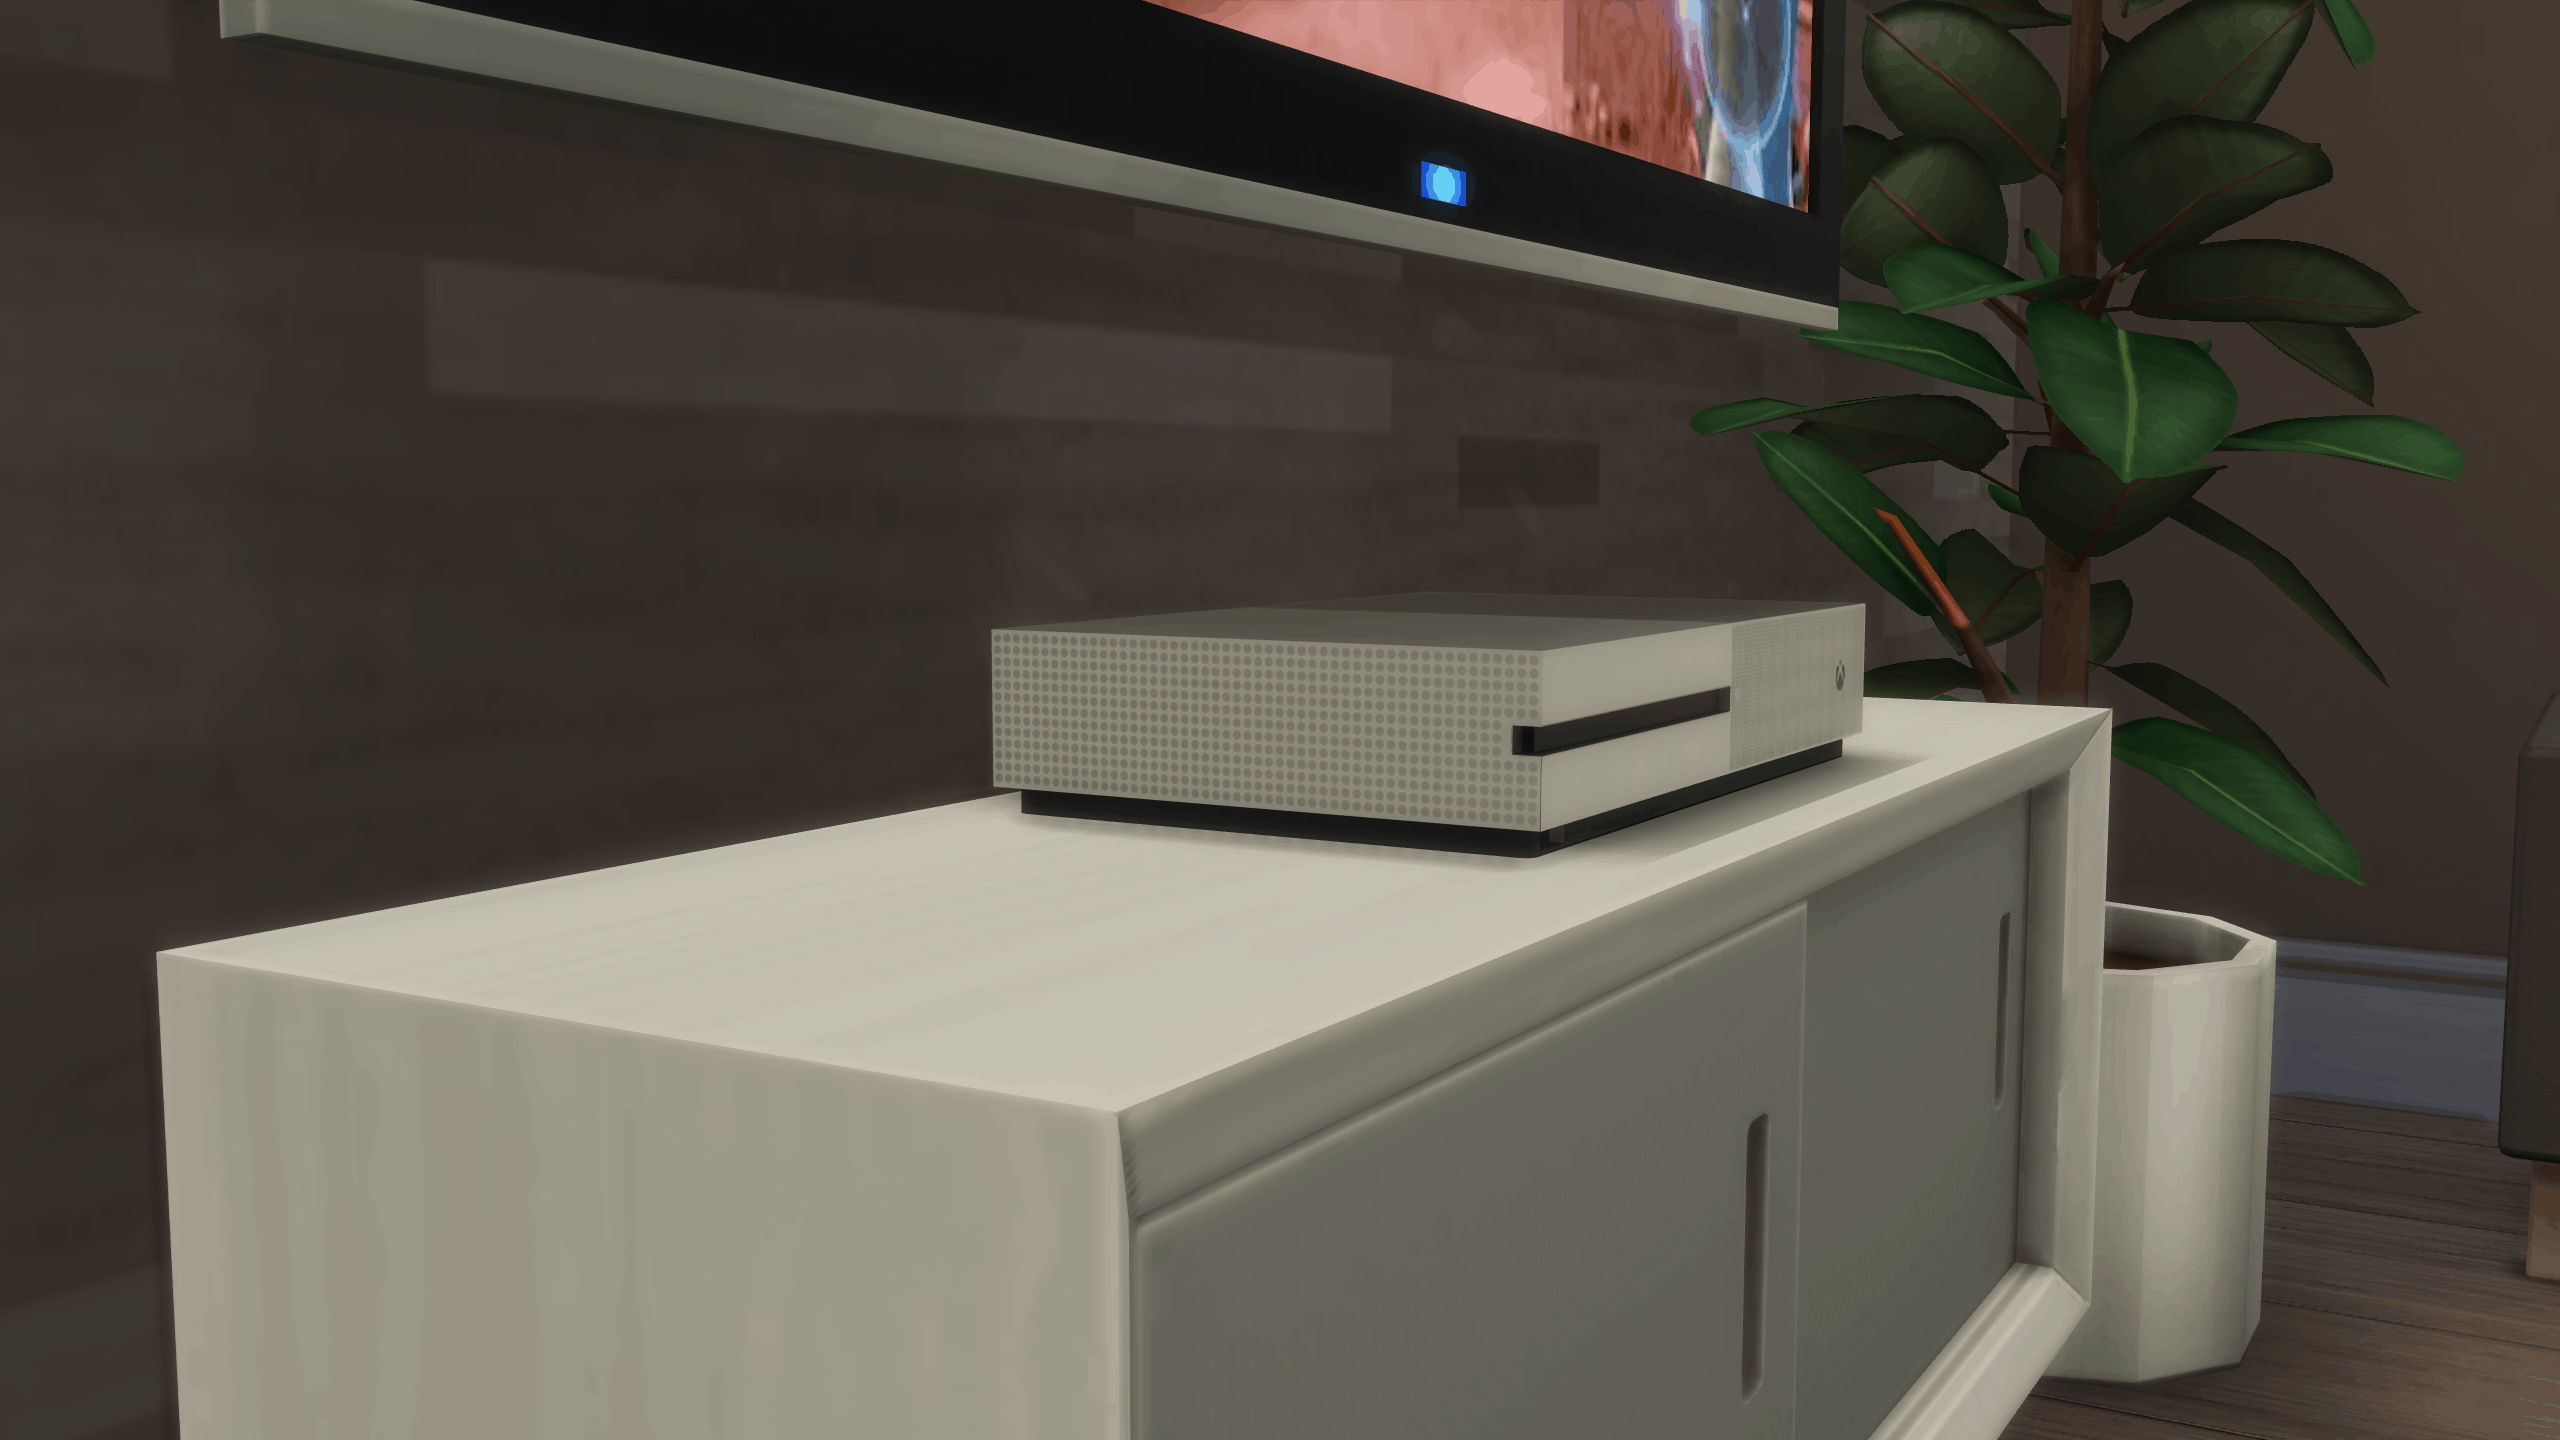 the sims 4 xbox one